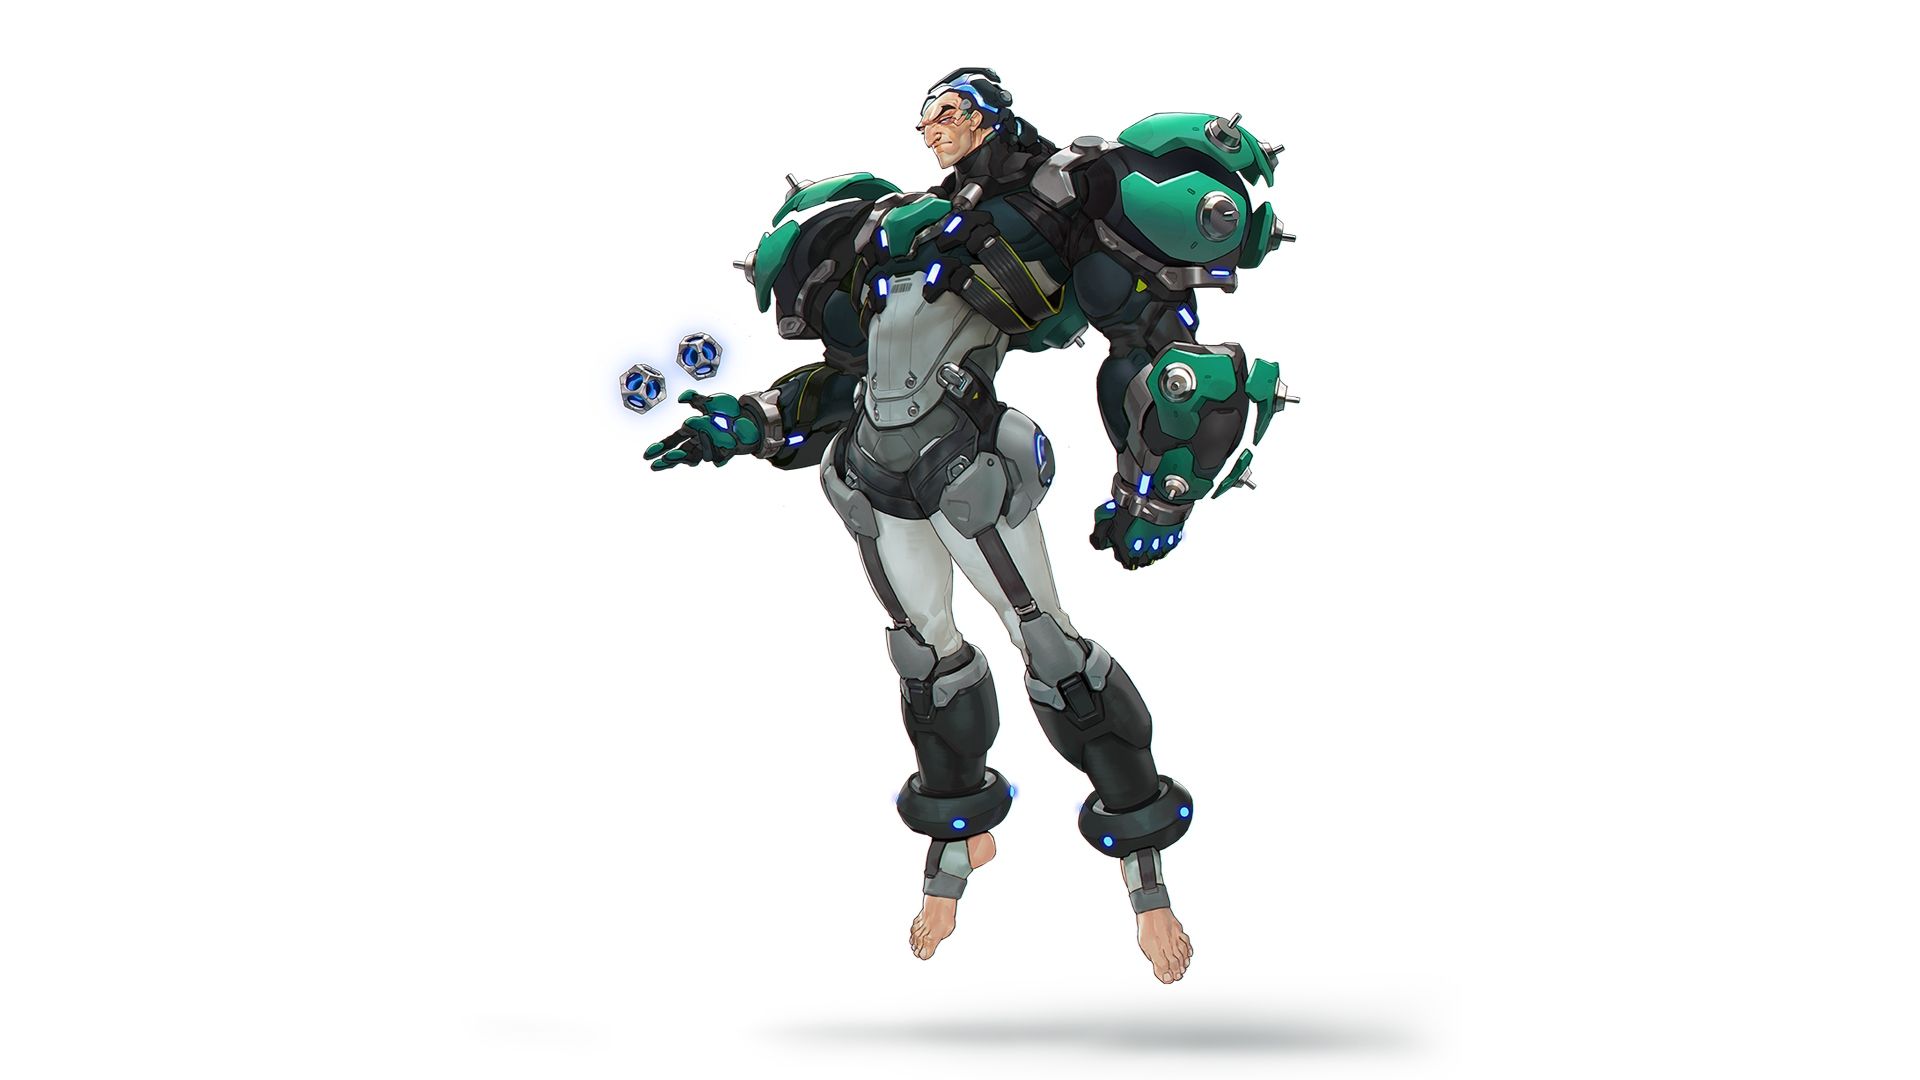 sigma in overwatch 2